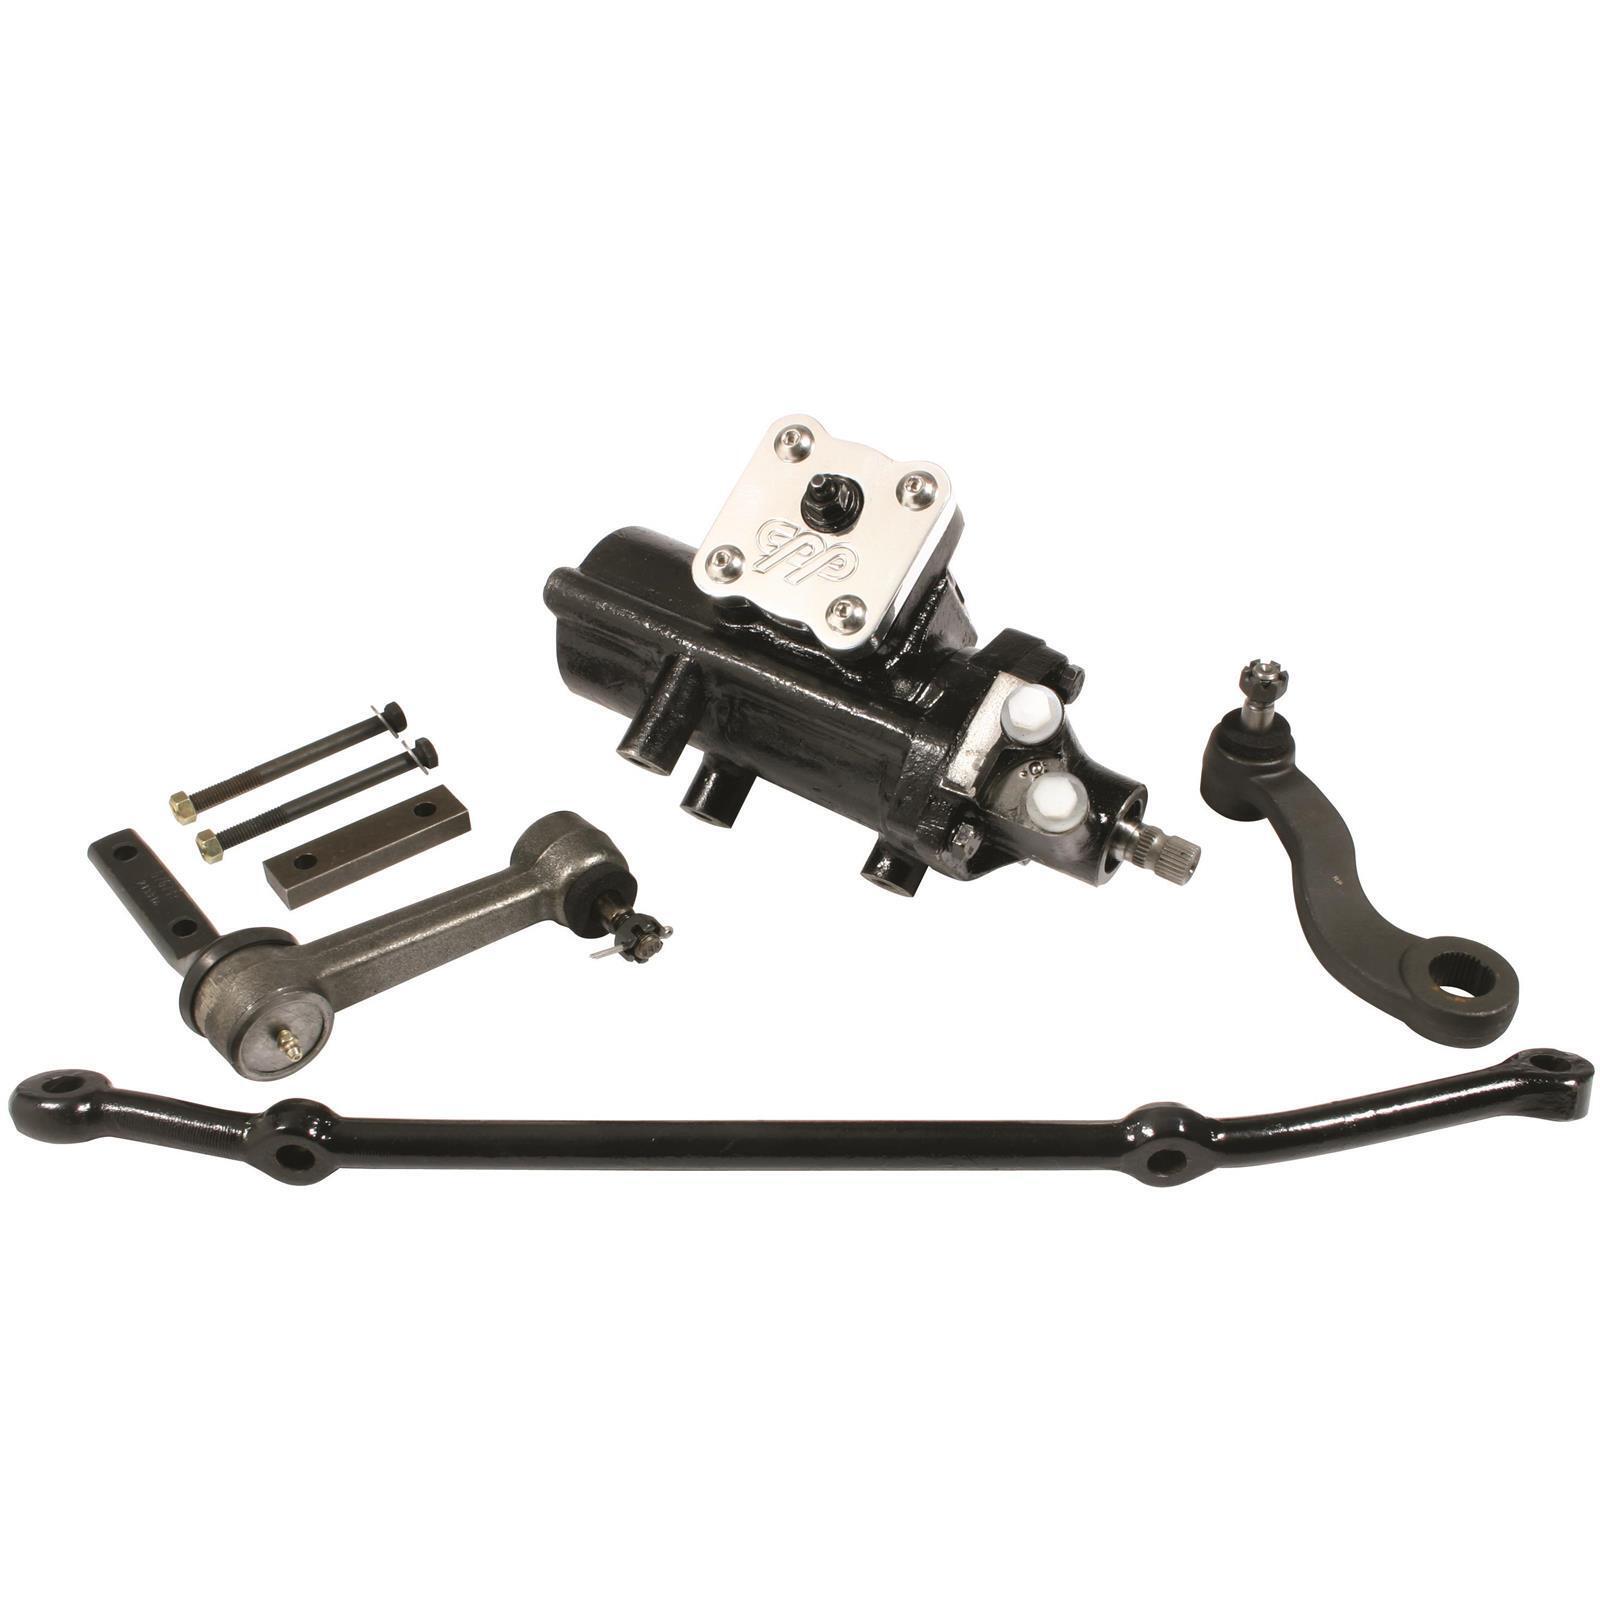 Power Steering Conversion Kit, 14:1 Ratio, Fits Chevy Car 1958-64